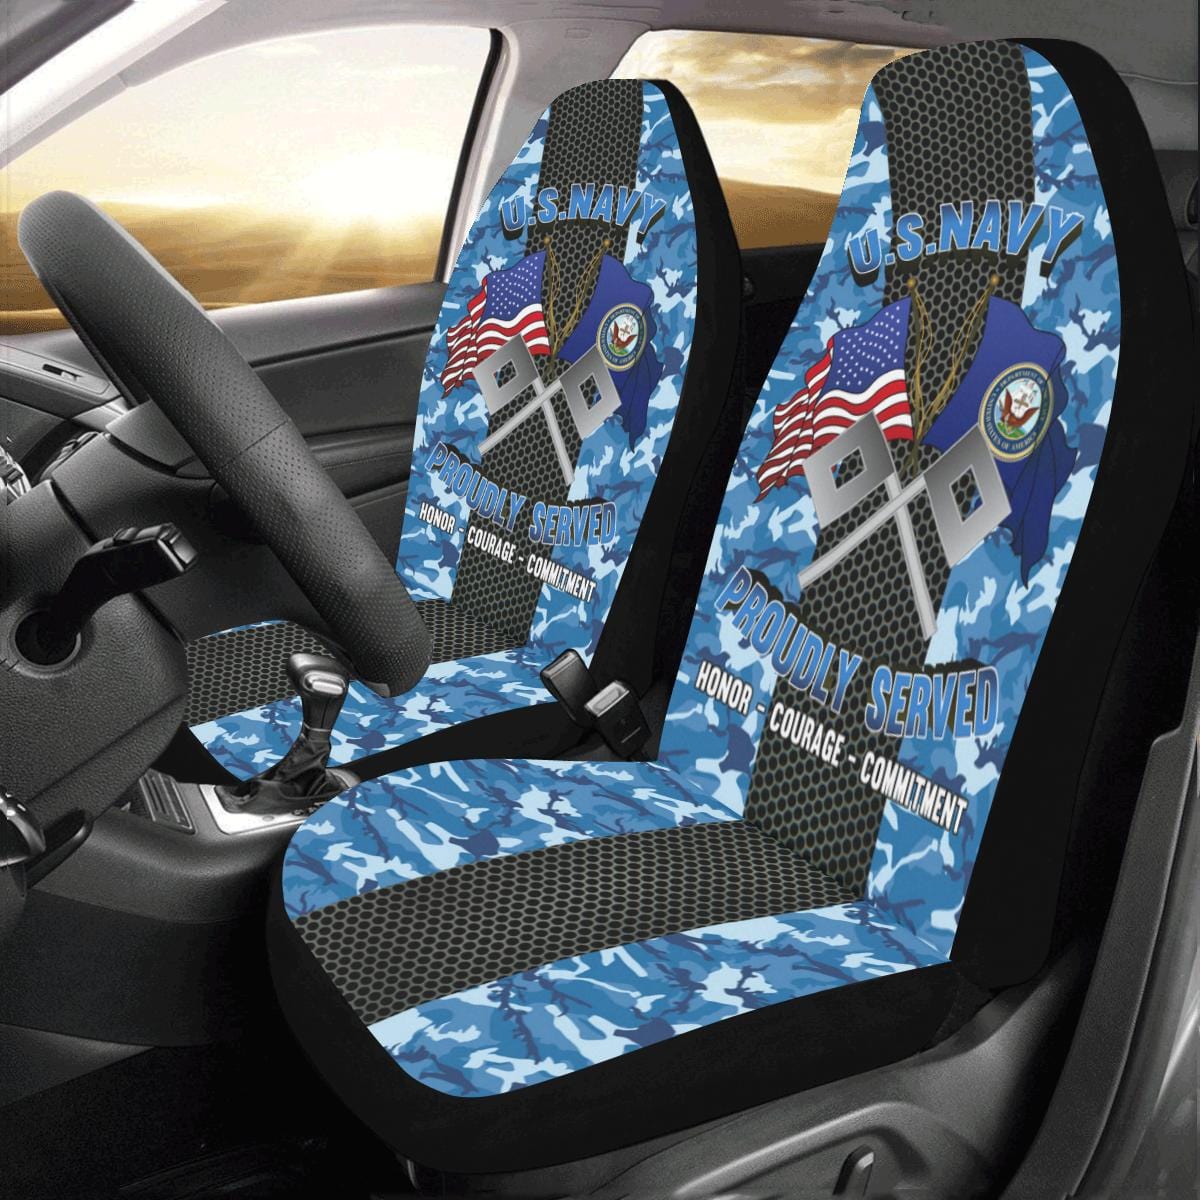 U.S Navy Signalman Navy SN Car Seat Covers (Set of 2)-SeatCovers-Navy-Rate-Veterans Nation